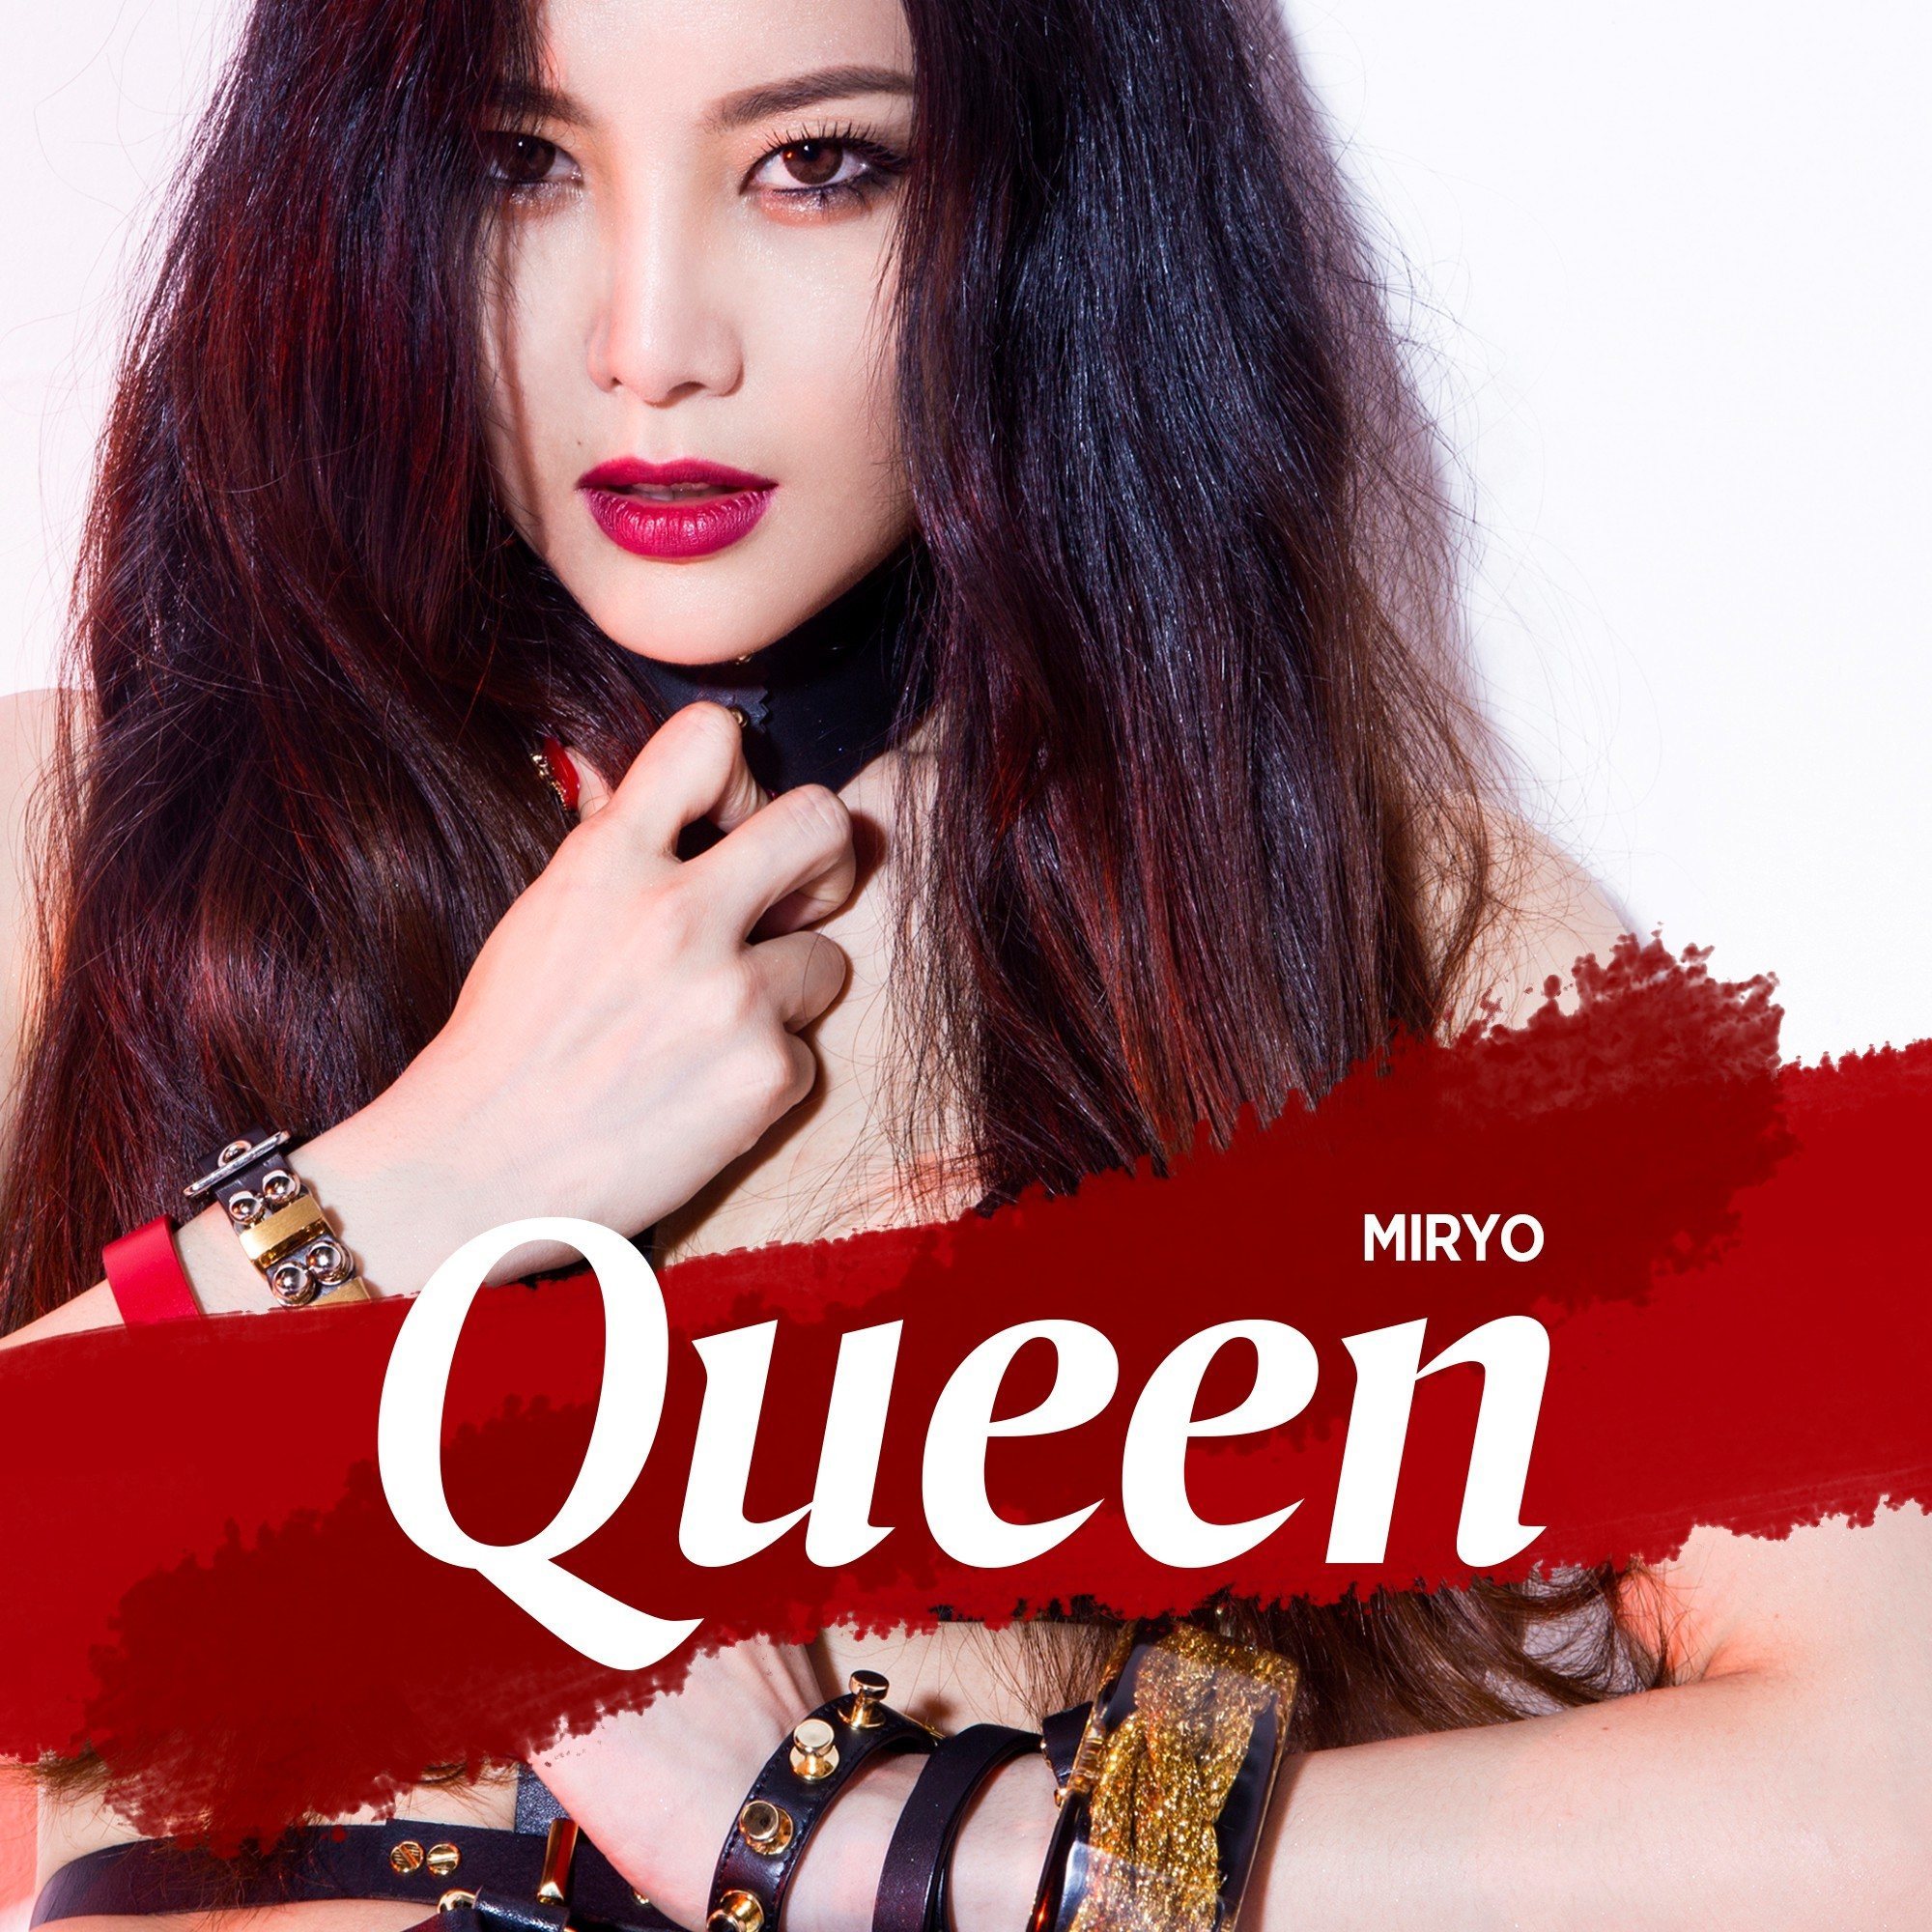 miryo_quee